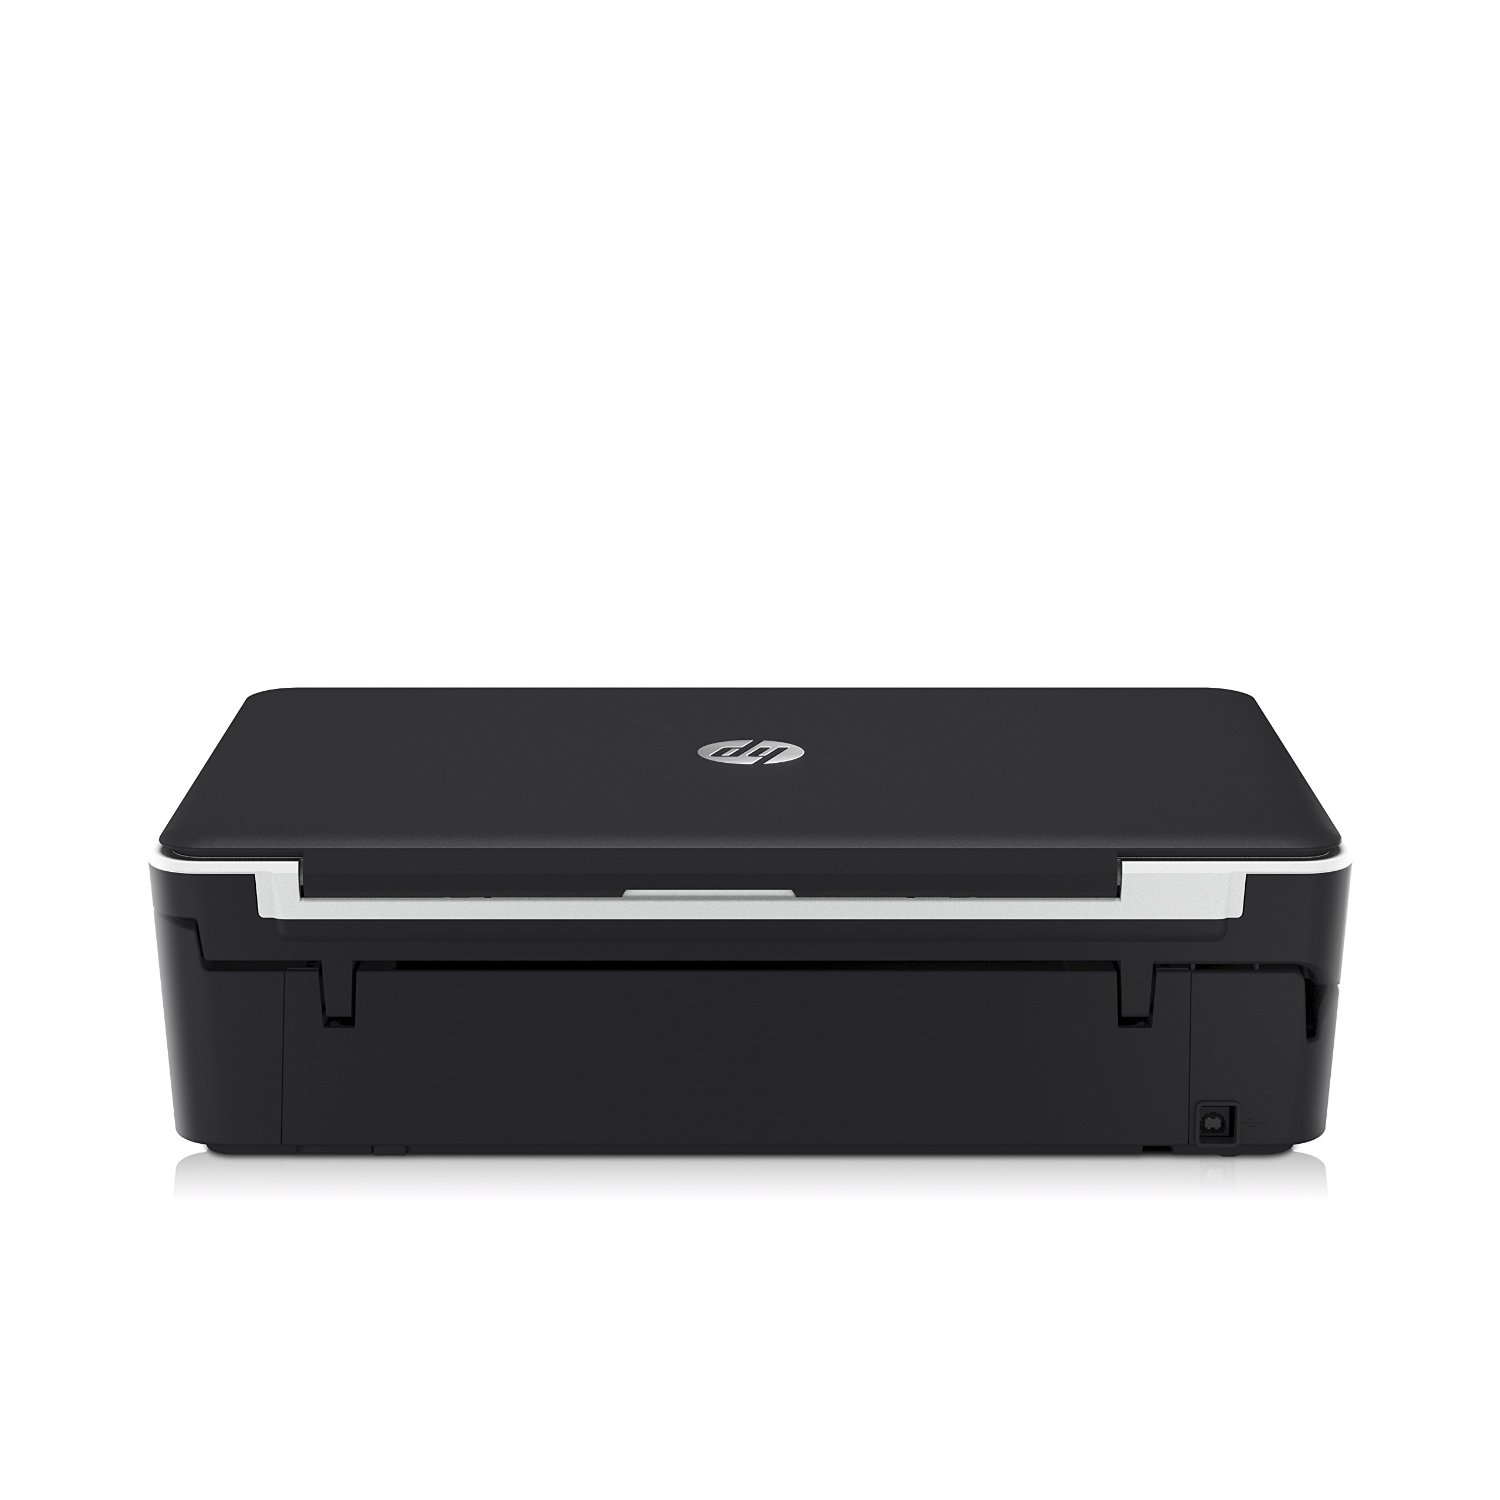 Hp Envy 5534 Wireless All In One Color Photo Printer N3 Free Image Download 6687